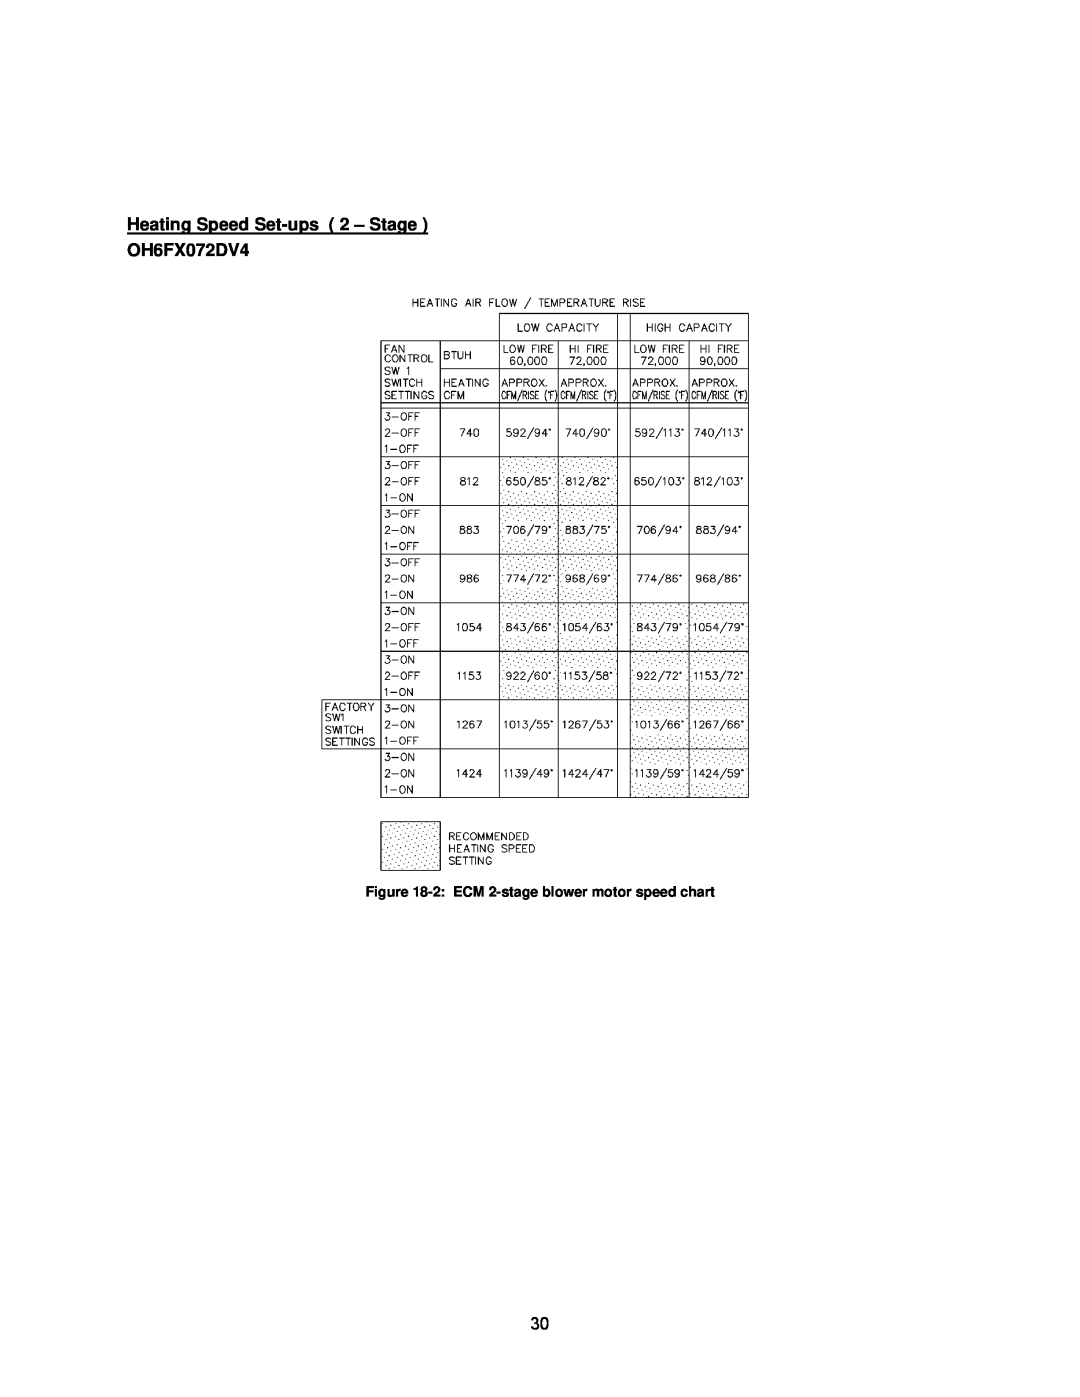 Thermo Products OH8FA119DV5B Heating Speed Set-ups 2 – Stage OH6FX072DV4, 2:ECM 2-stageblower motor speed chart 